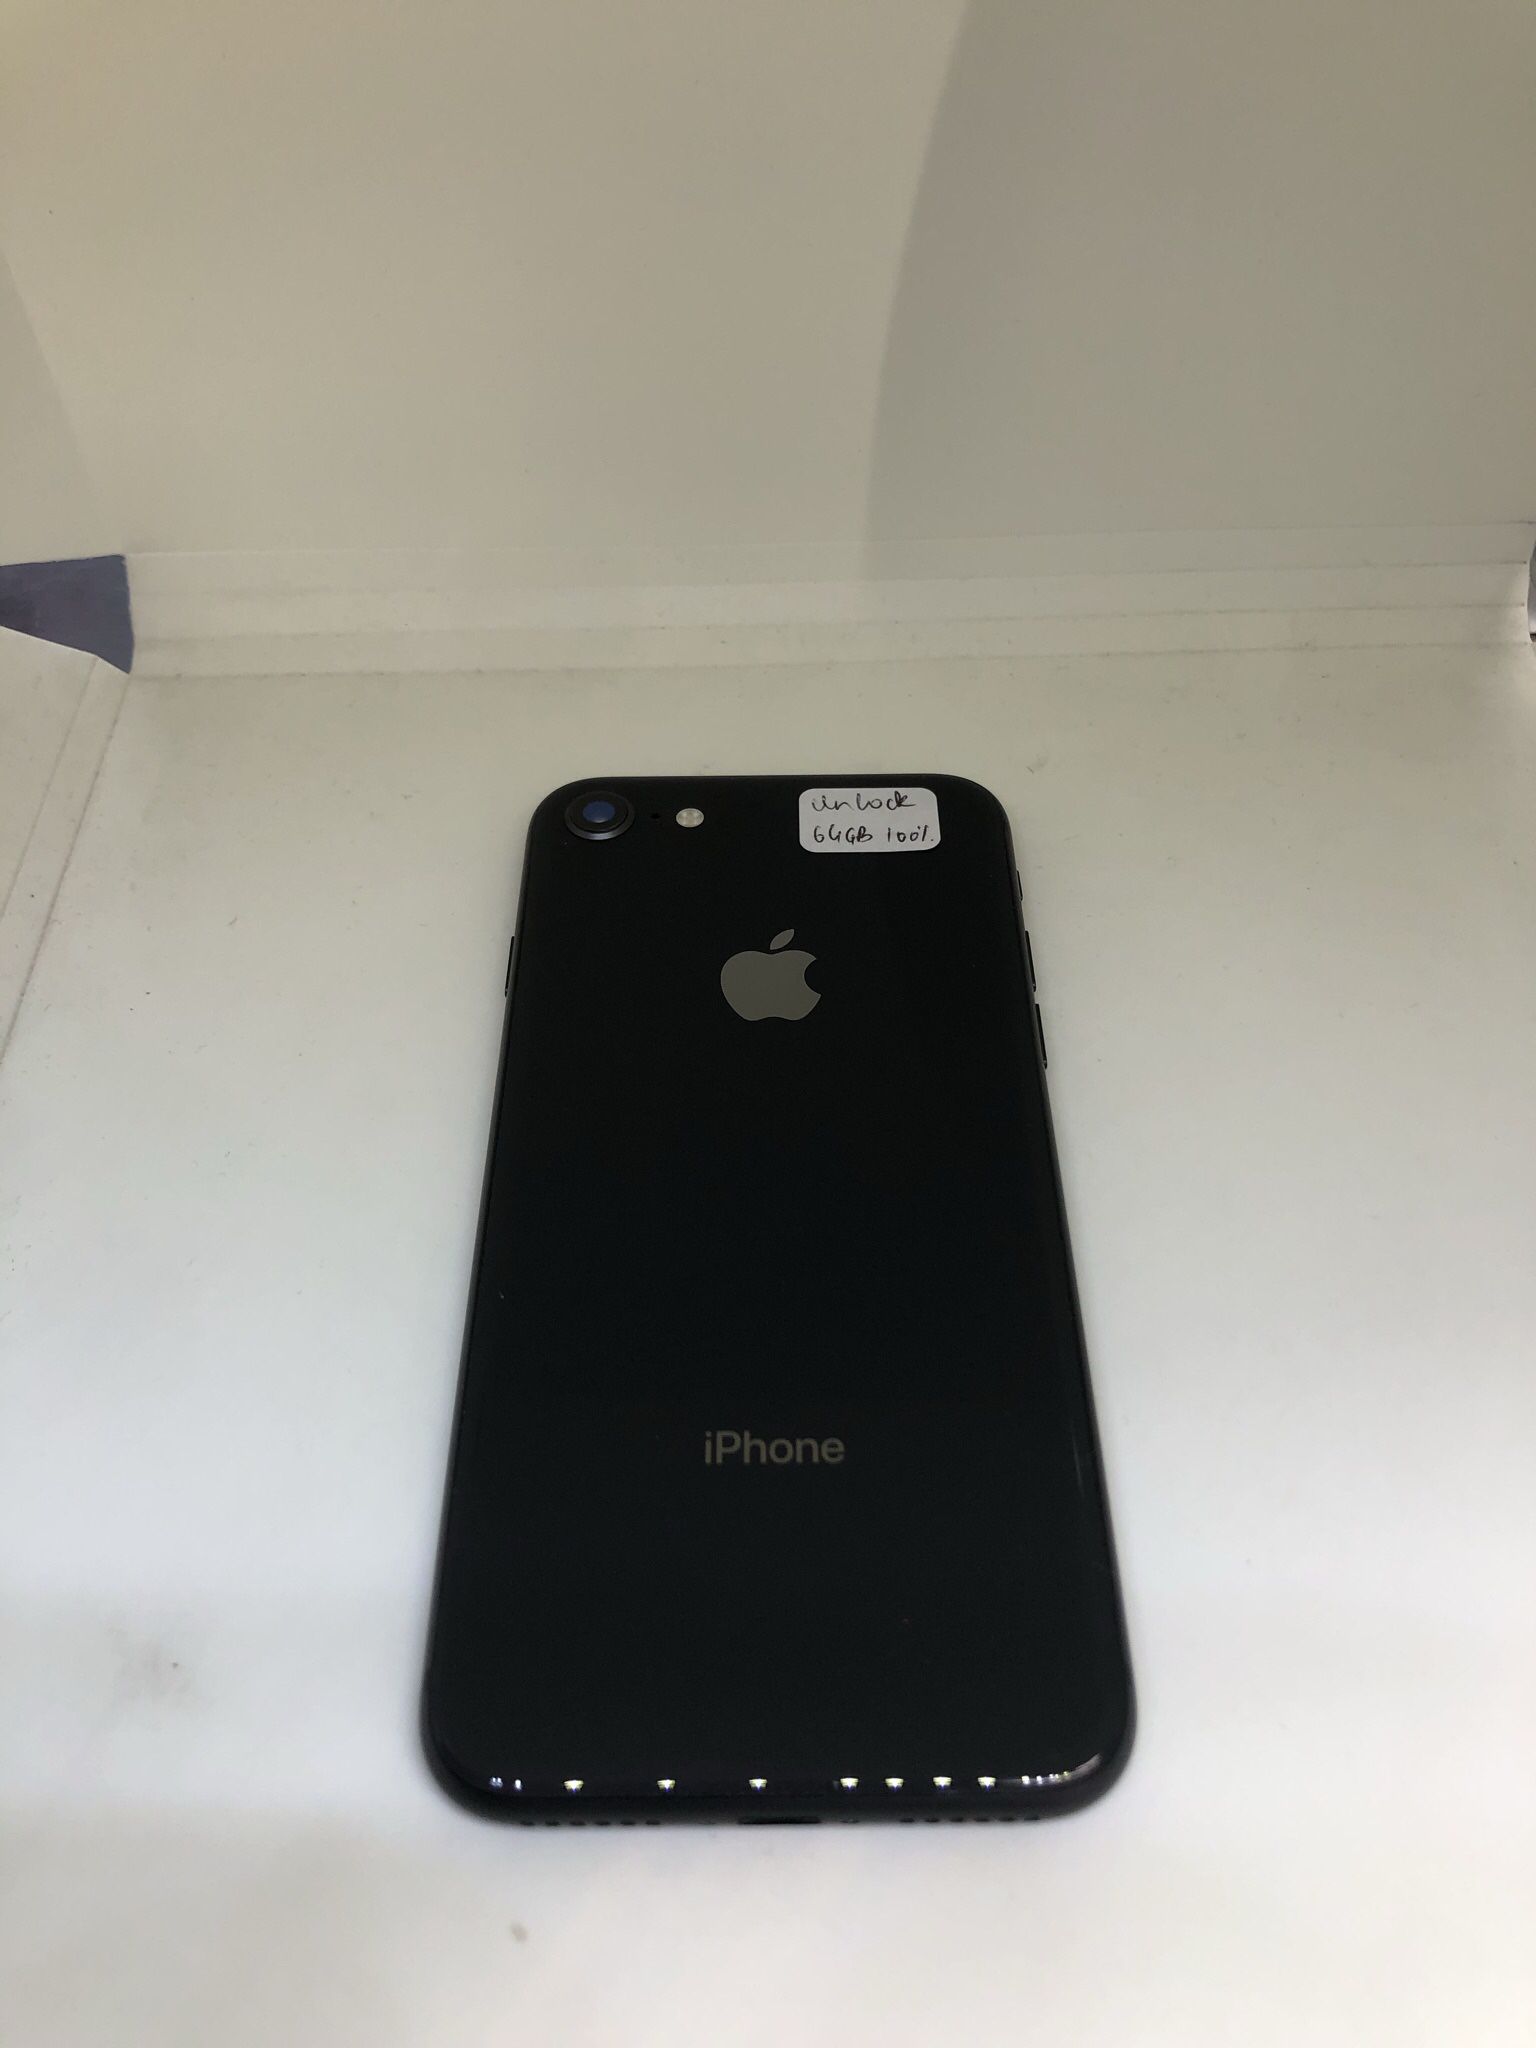 CLEARANCE SALE!!! APPLE IPHONE 7 UNLOCKED EXCELLENT CONDITION! GET FREE  ACCESORIES AND SIM ACTIVATION WORTH 80$!!! for Sale in Indianapolis, IN -  OfferUp